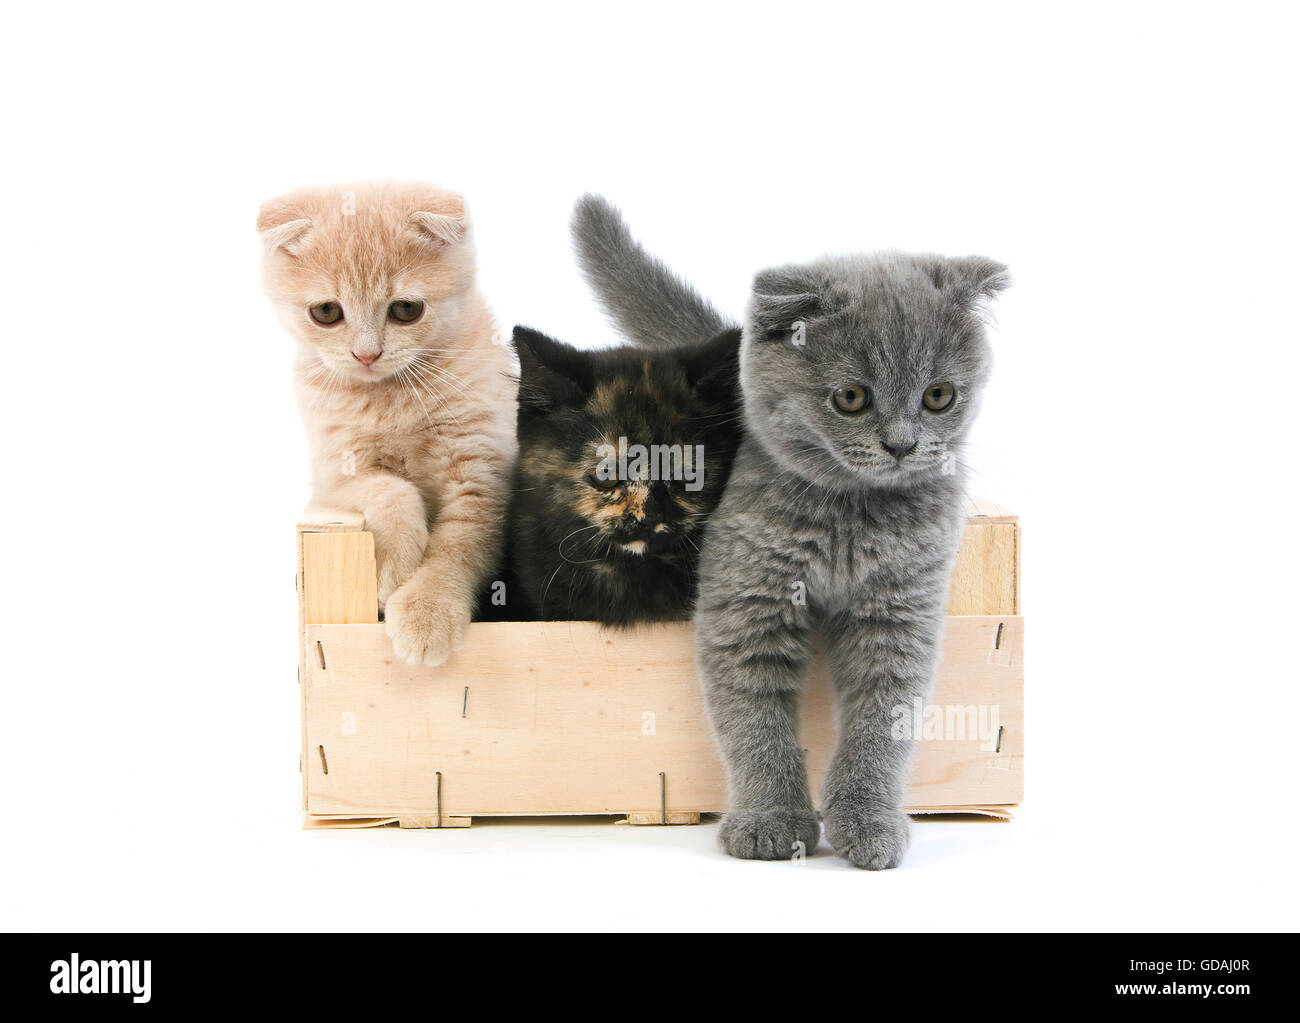 Blue Scottish Fold and Cream Scottish Fold and black Tortoise-Shell British Shorthair Domestic Cat, 2 Months Old  Kittens playing in Crateful against White Background Stock Photo